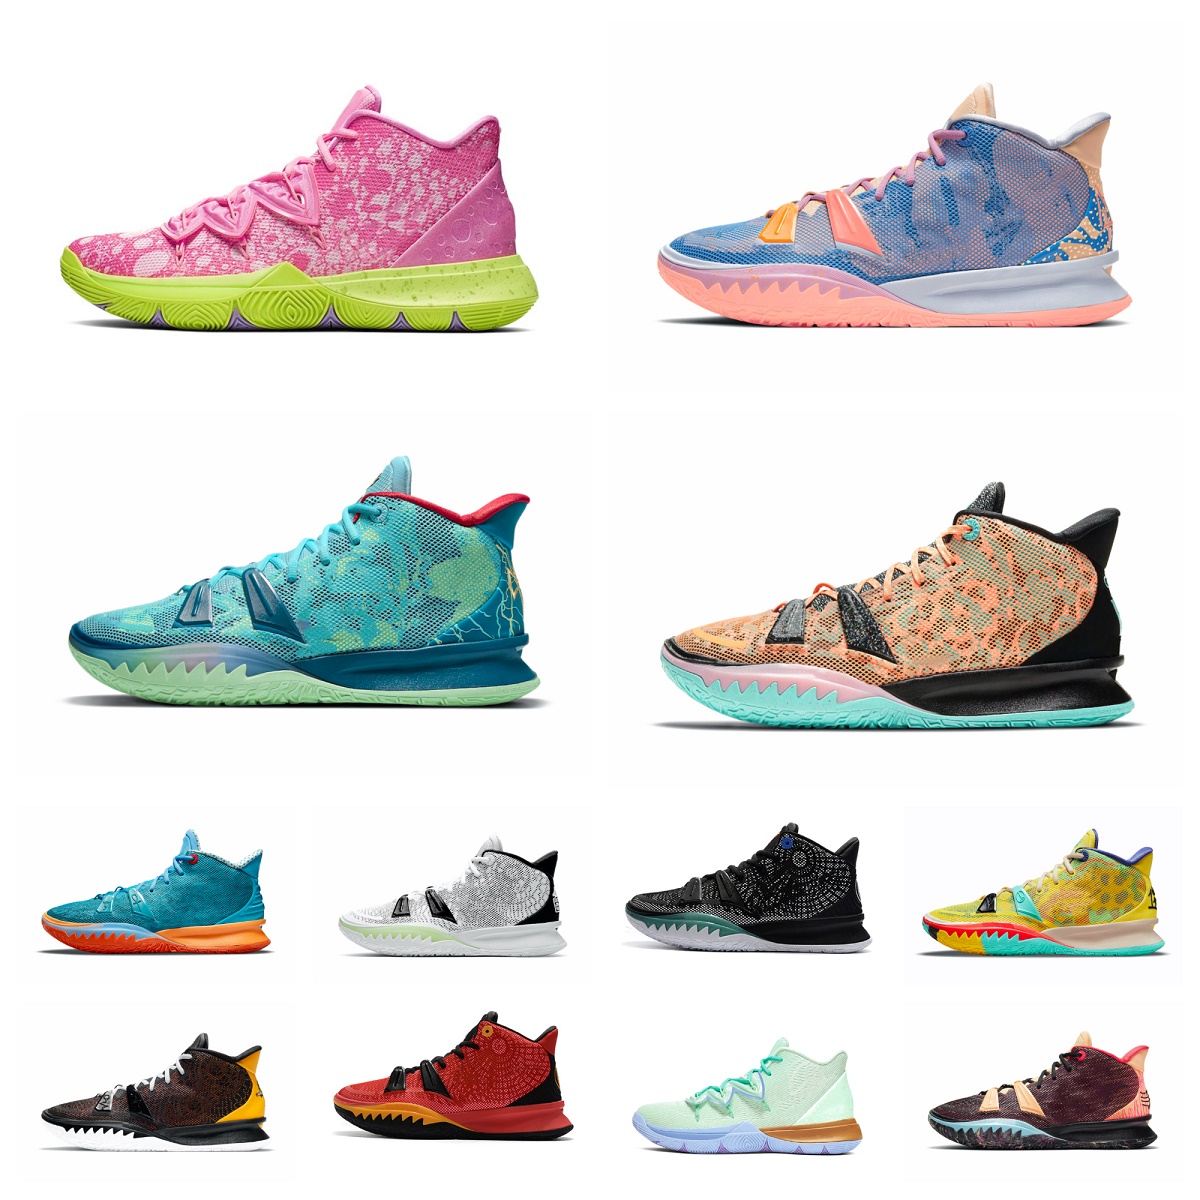 

KYRie 7 Mens Basketball Shoes Kyries 5 One World 1 People Pink Yellow Roswell Rayguns Preheat Soundwave Daughters Azurie Expressions Bred Visions Designer Trainers, Bubble package bag